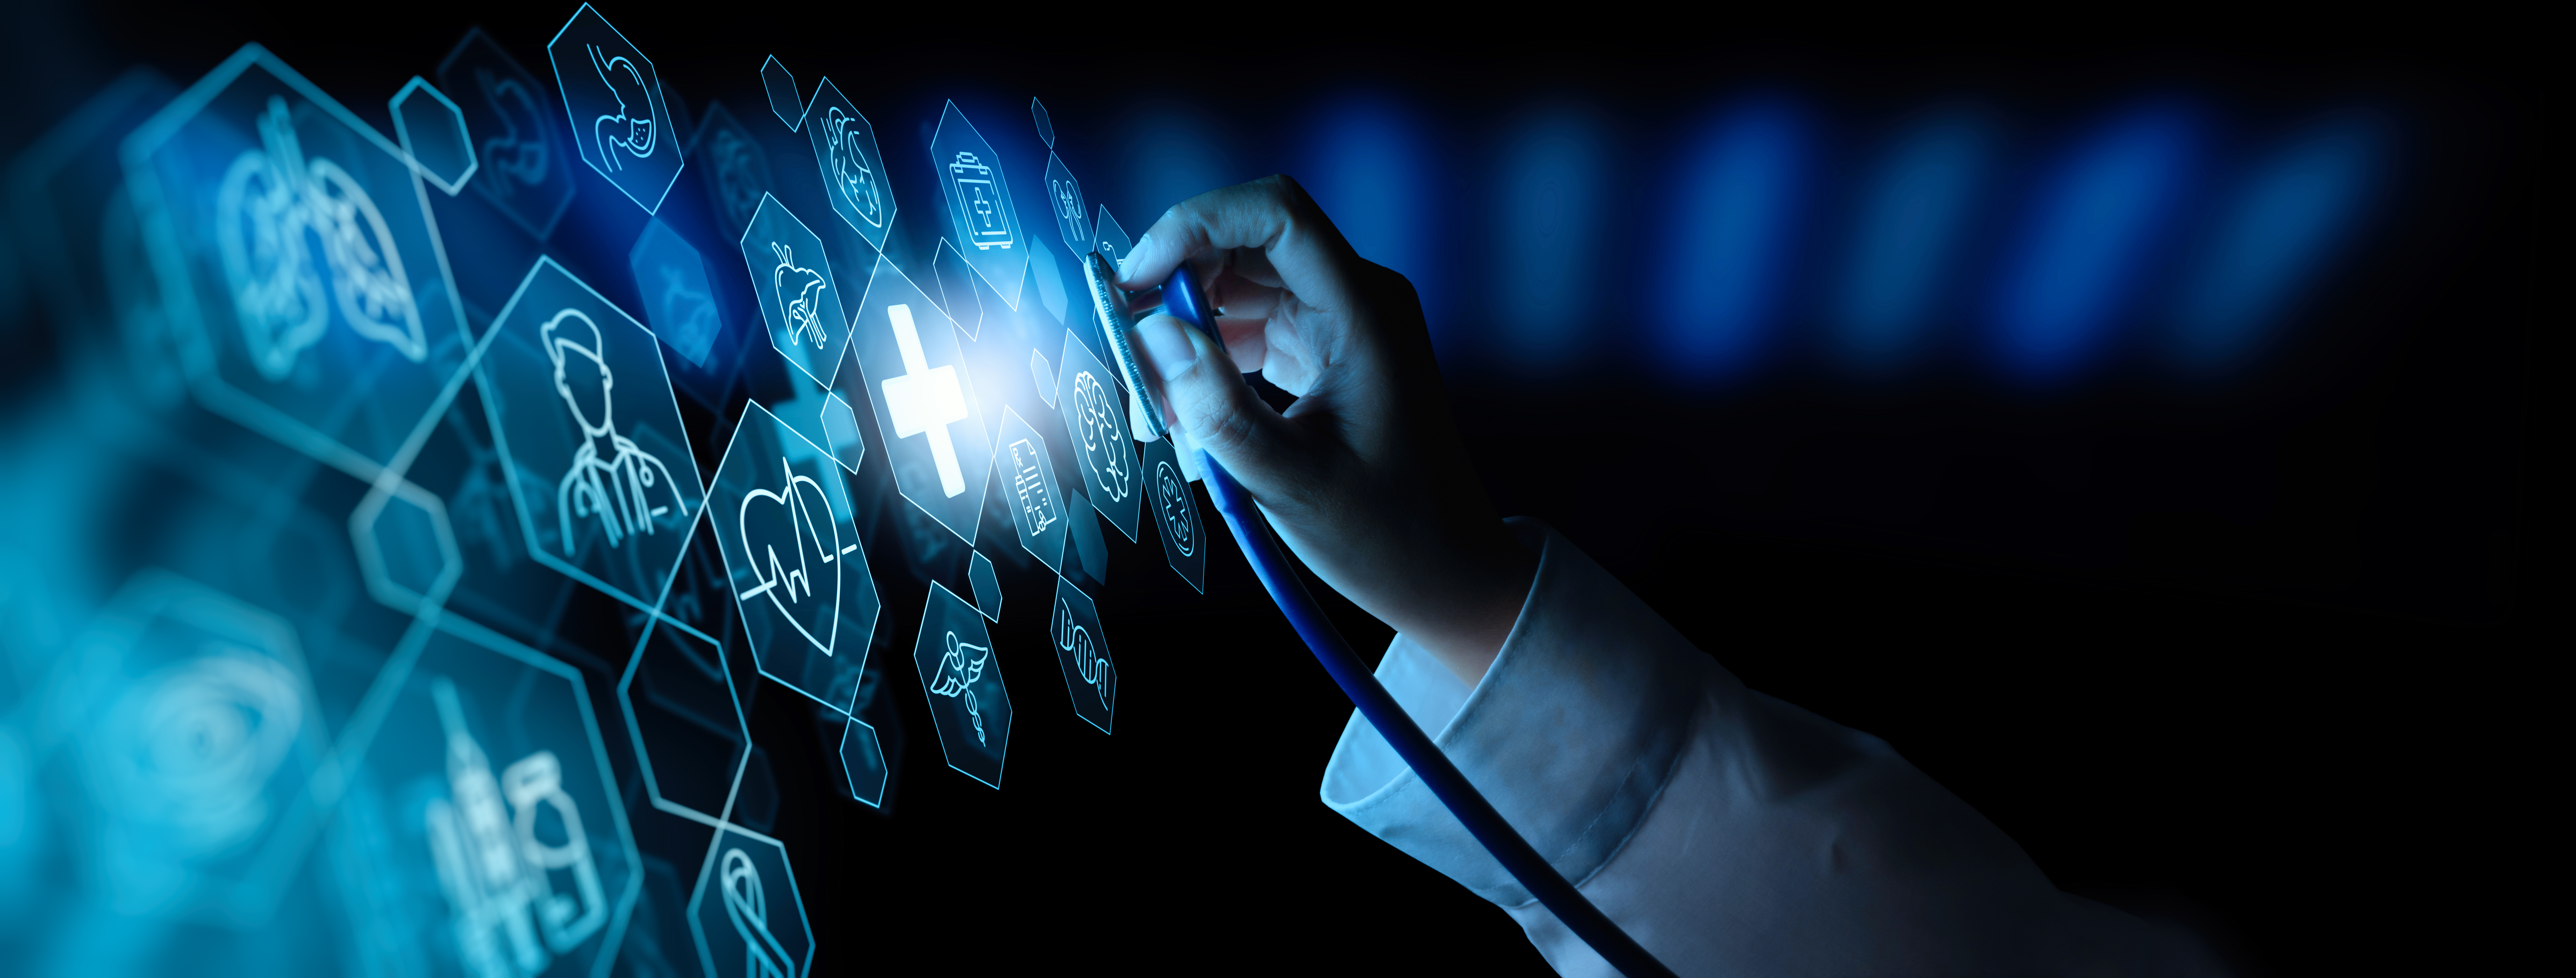 healthcare technology and IT trends for 2021